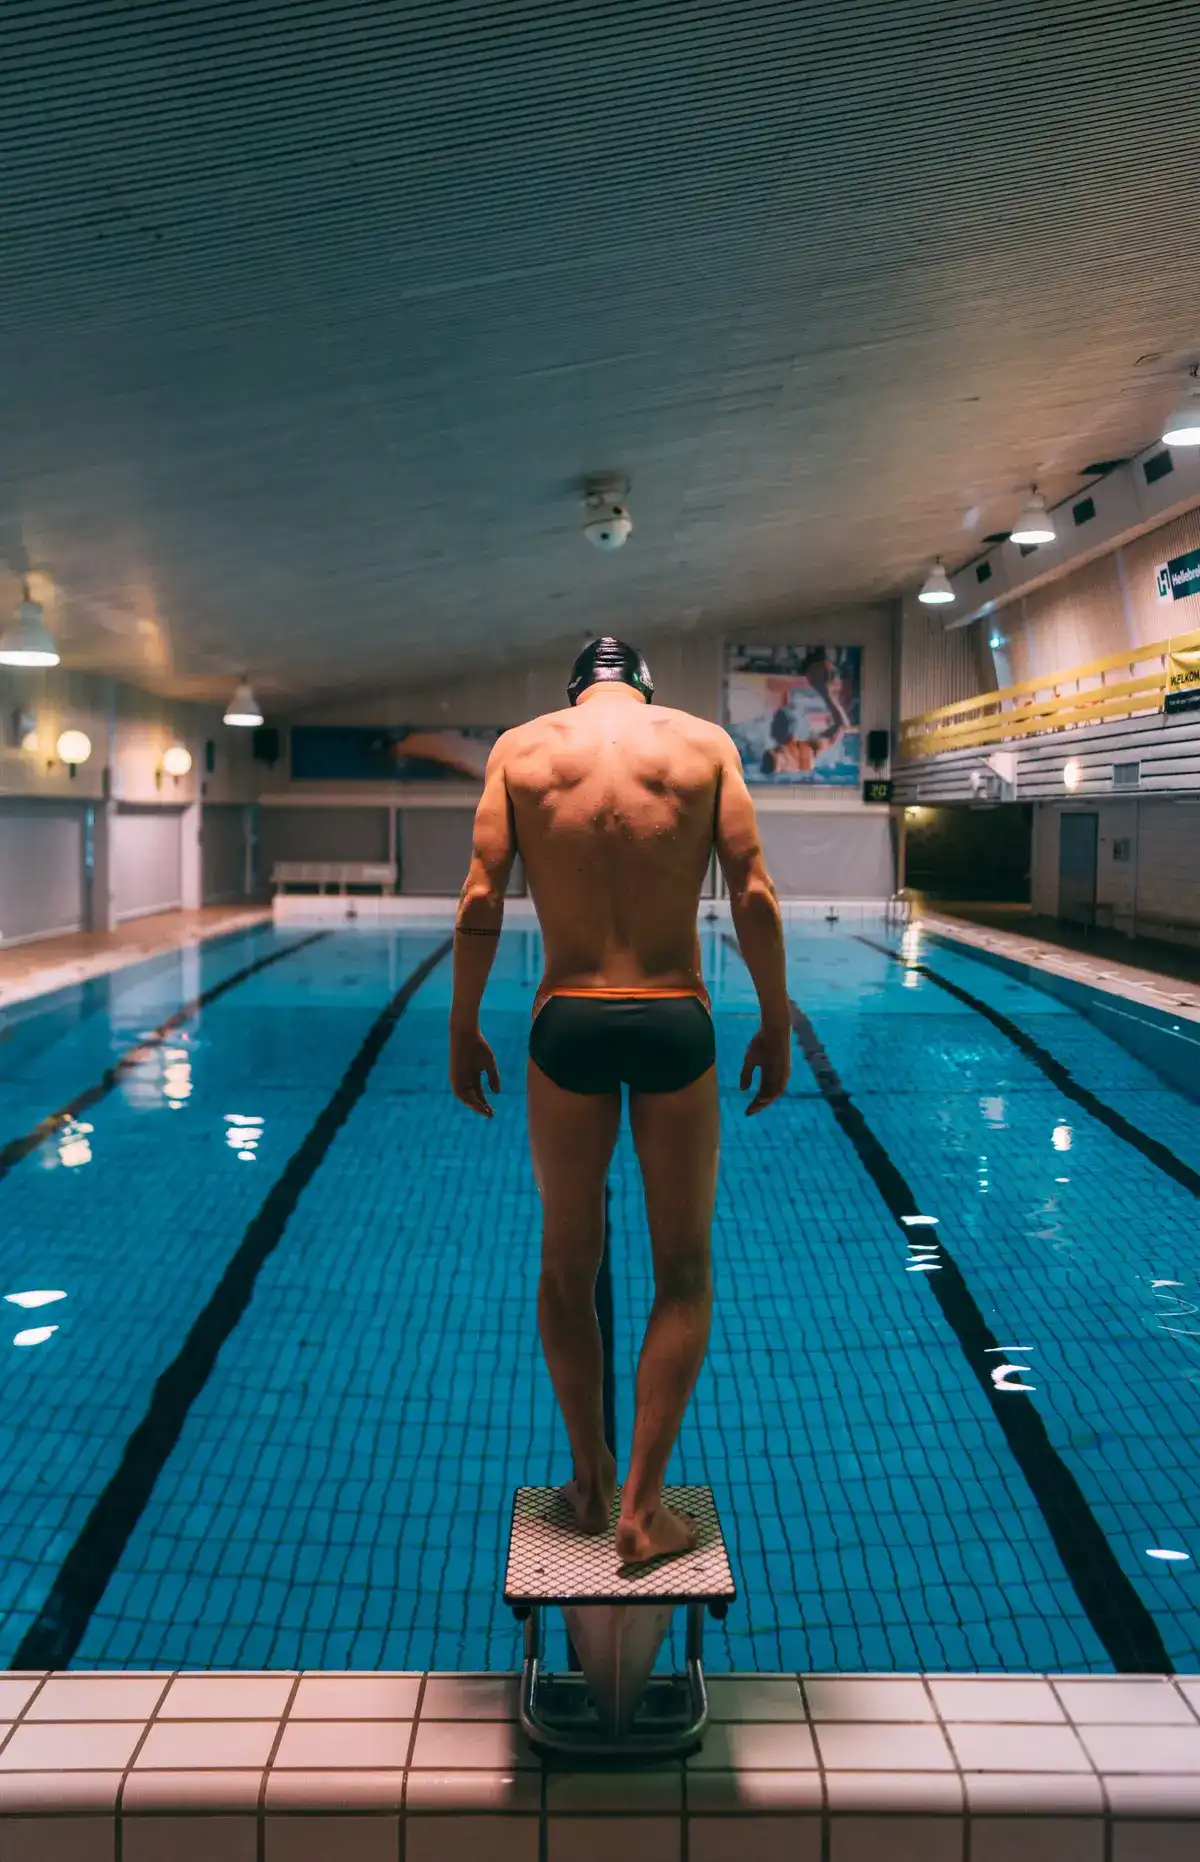 Lane swimmer looking onto an emptry swimming pool